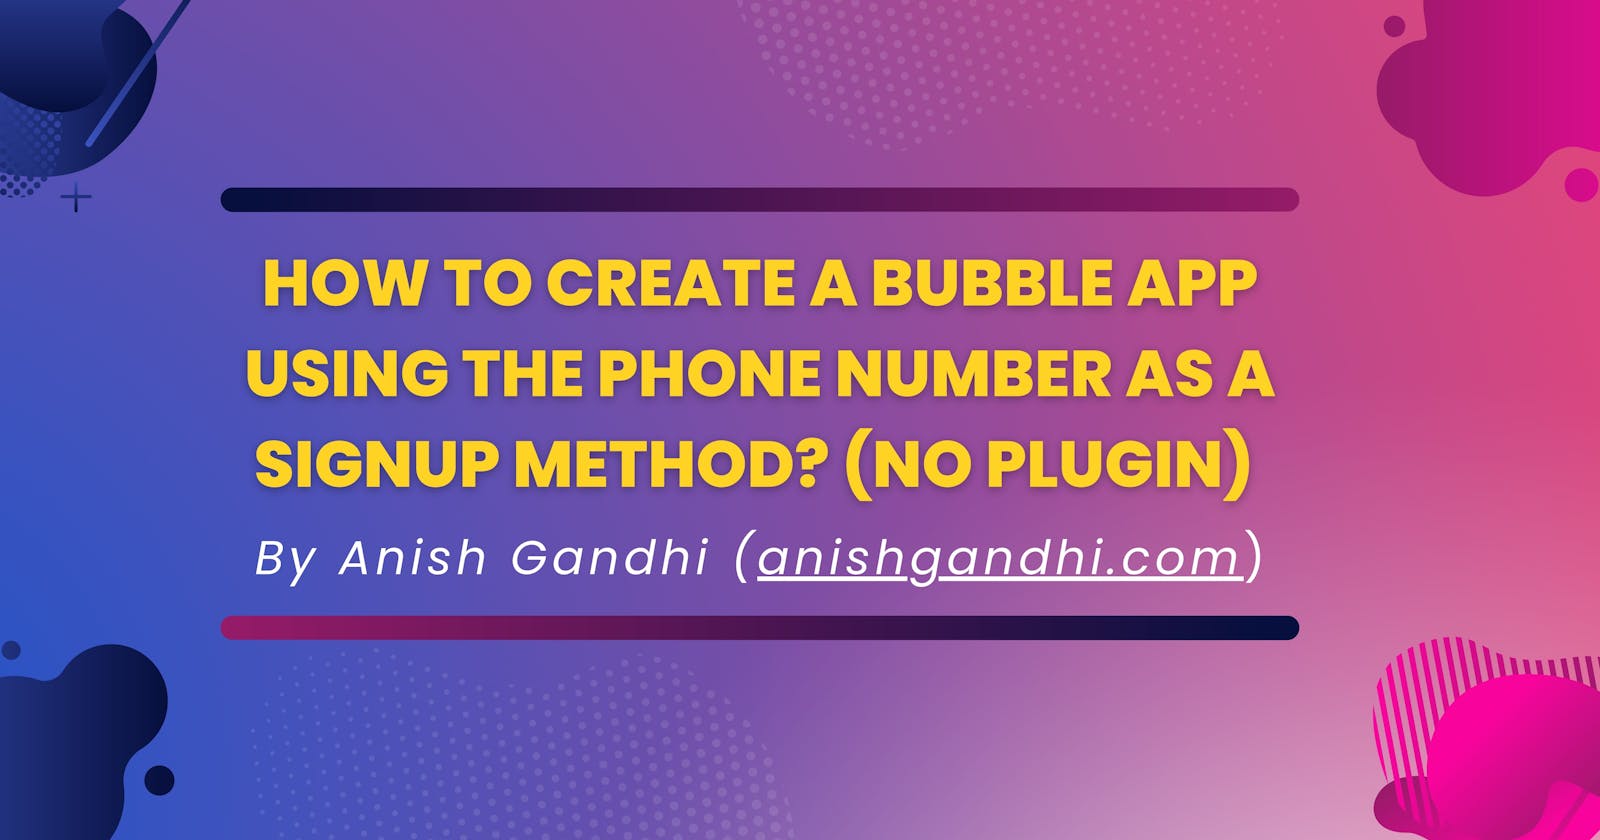 How to create a bubble app using the phone number as a signup method? (No Plugin)